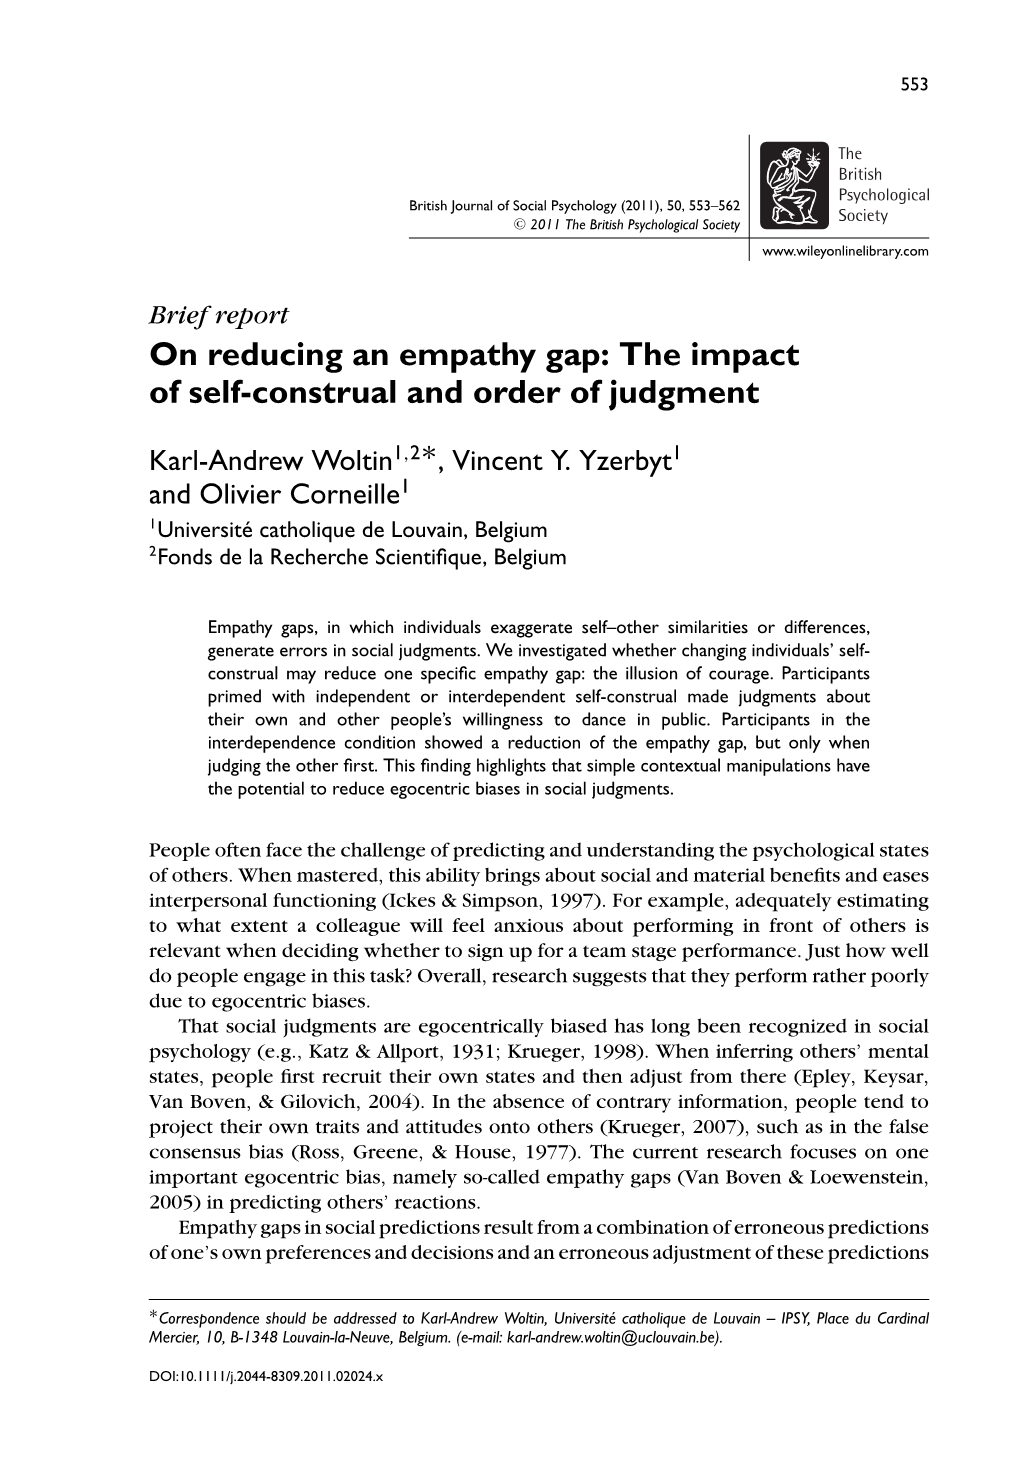 On Reducing an Empathy Gap: the Impact of Selfconstrual and Order Of